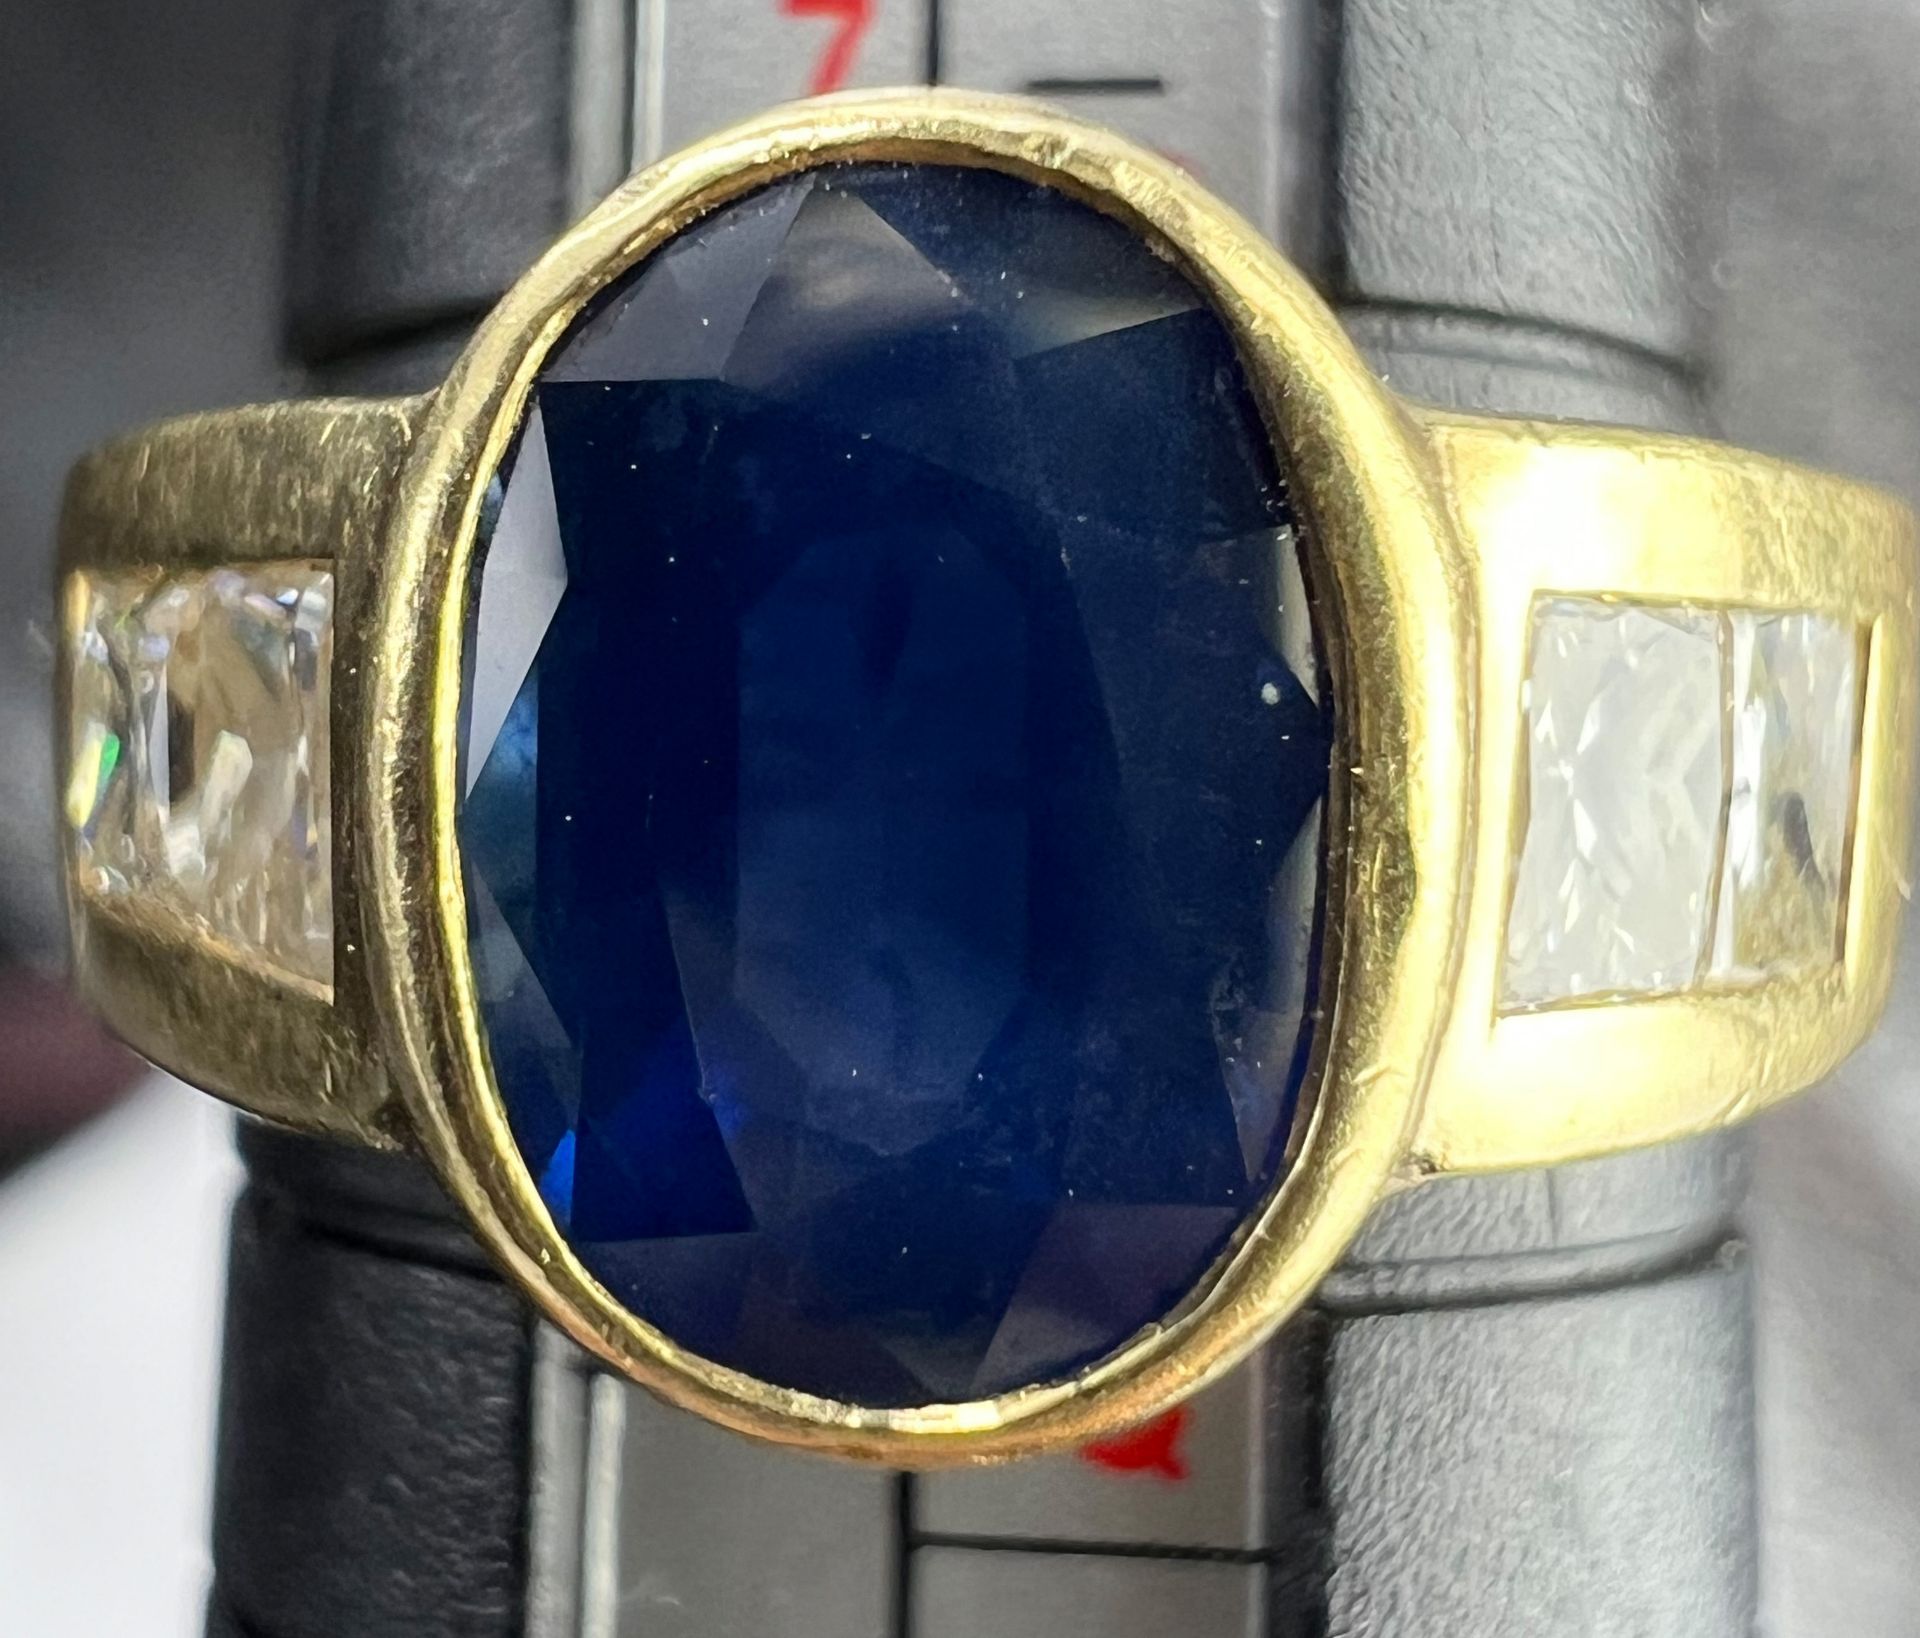 Ladies' ring. 750 yellow gold. 1 blue colored stone and 4 diamonds. - Image 8 of 10